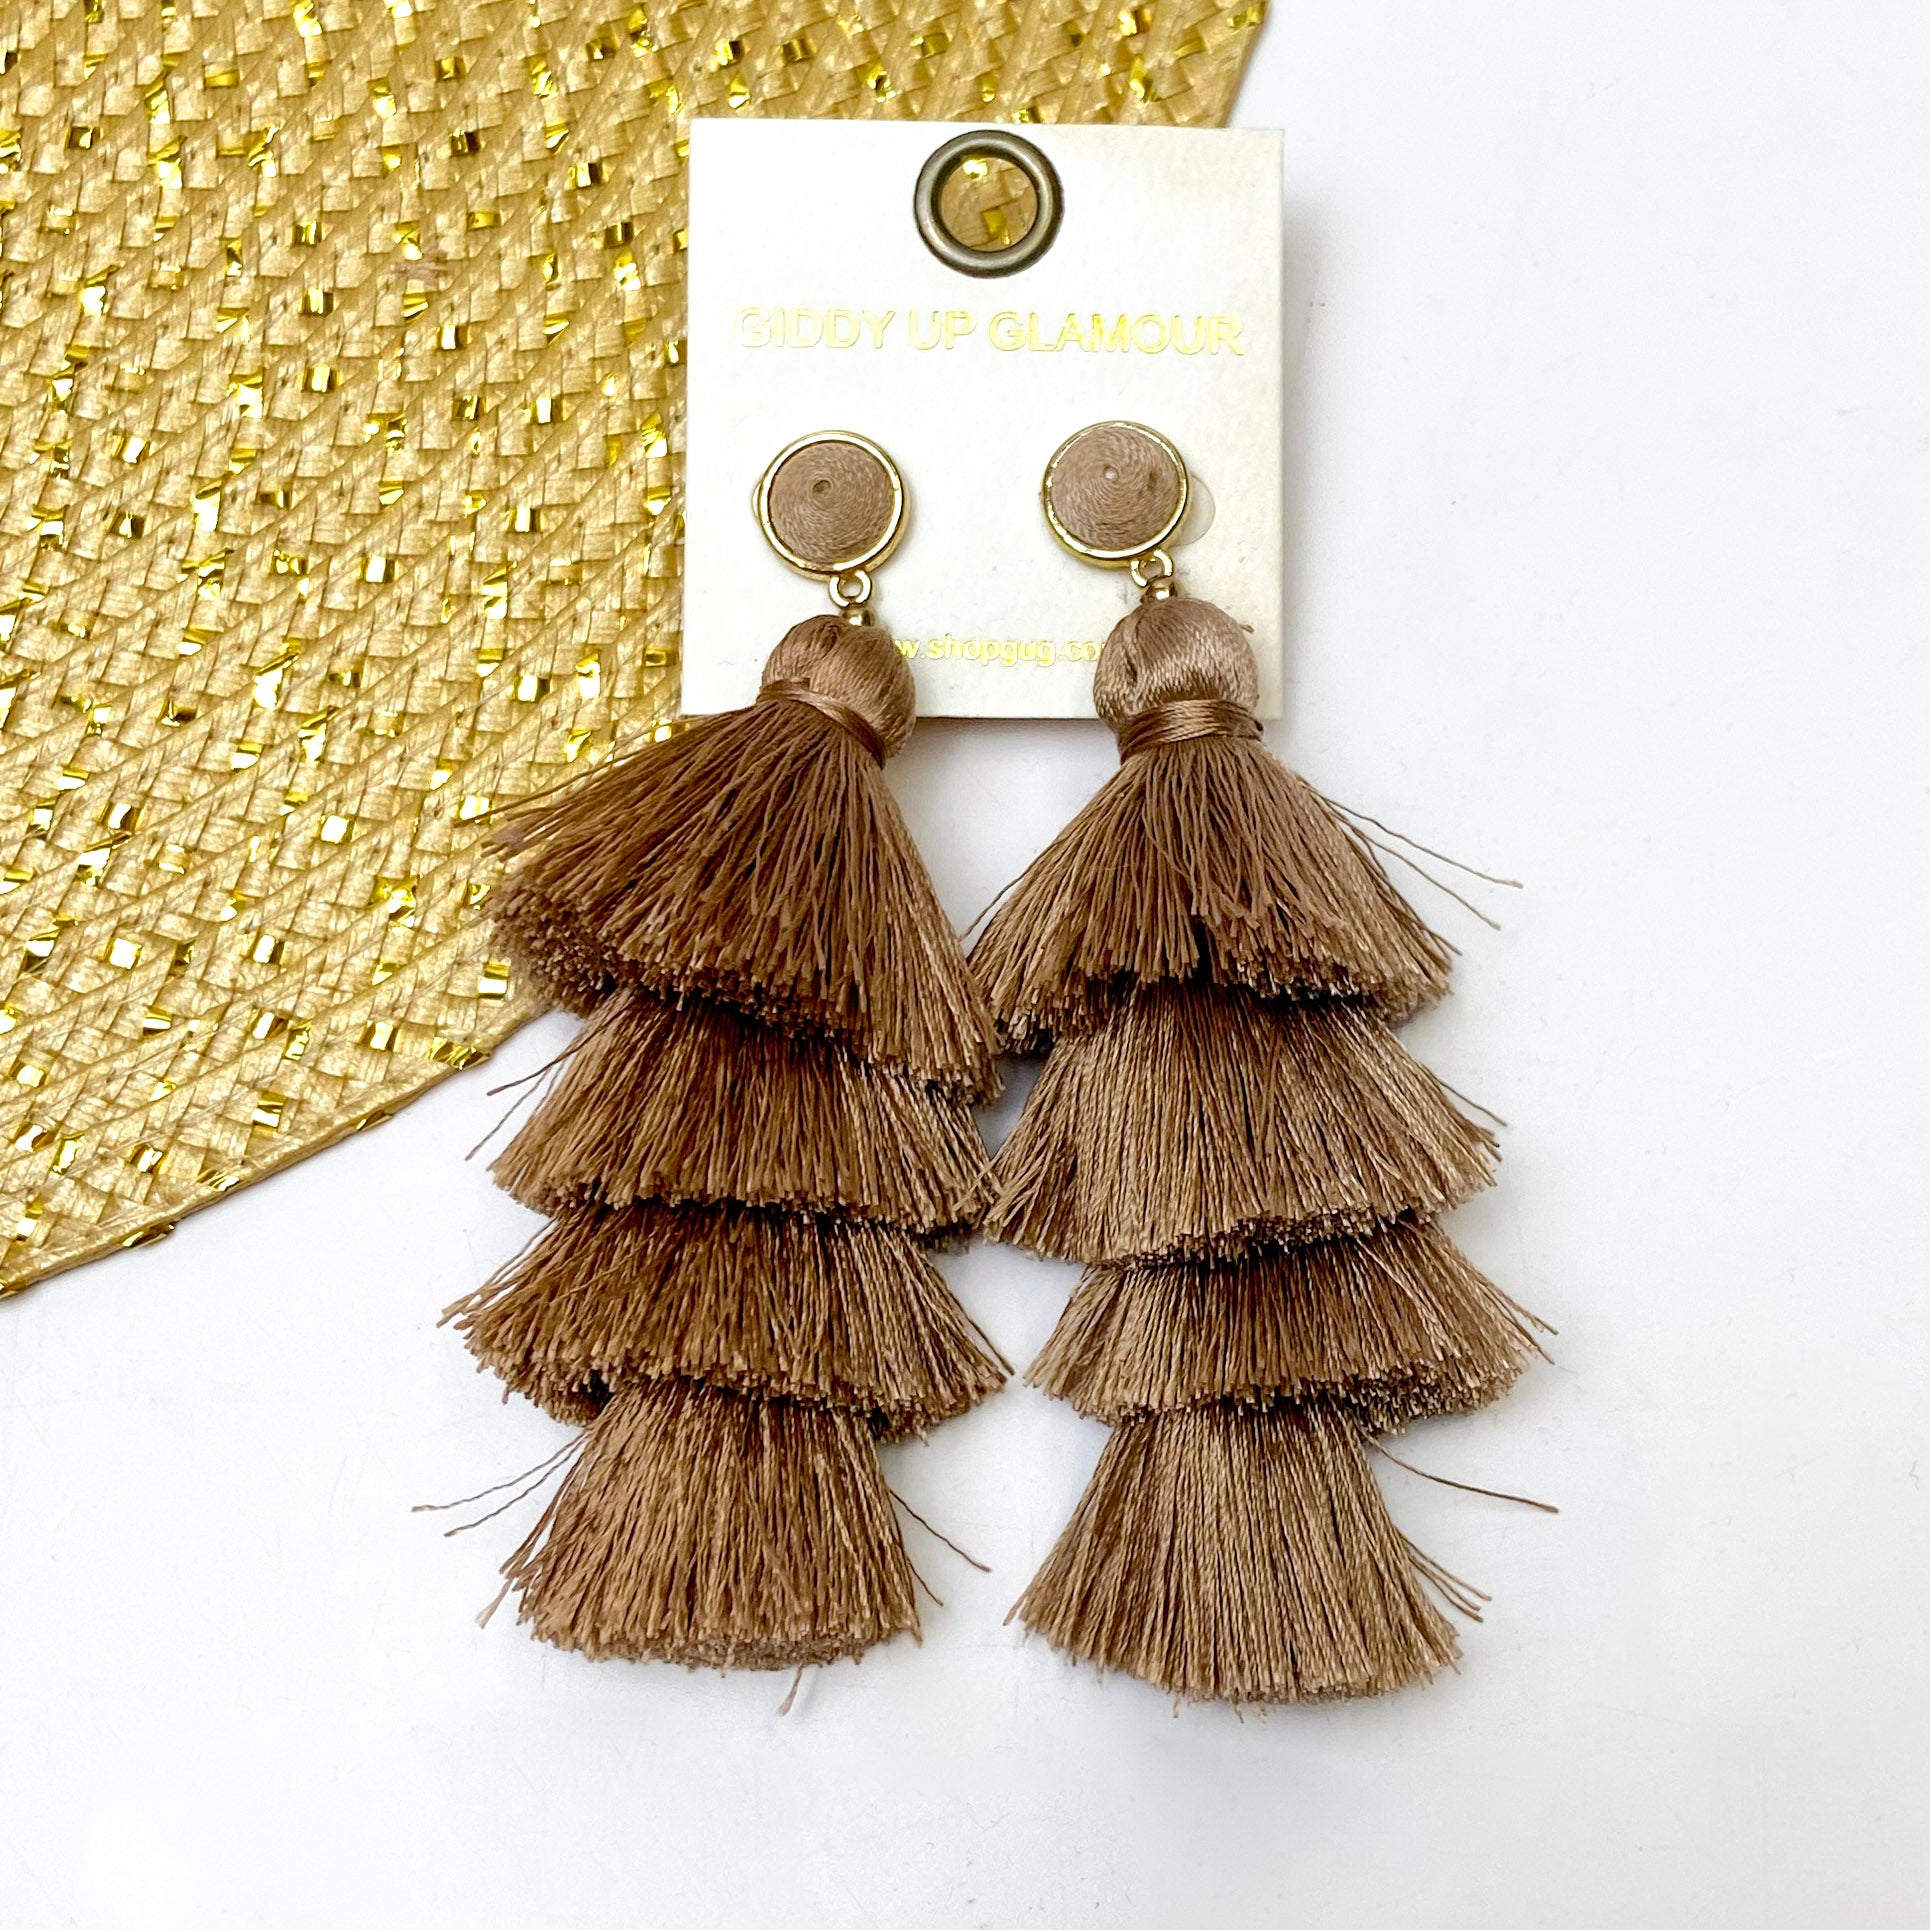 Four Tiered Tassel Earrings with Threaded Stud in Almond Brown